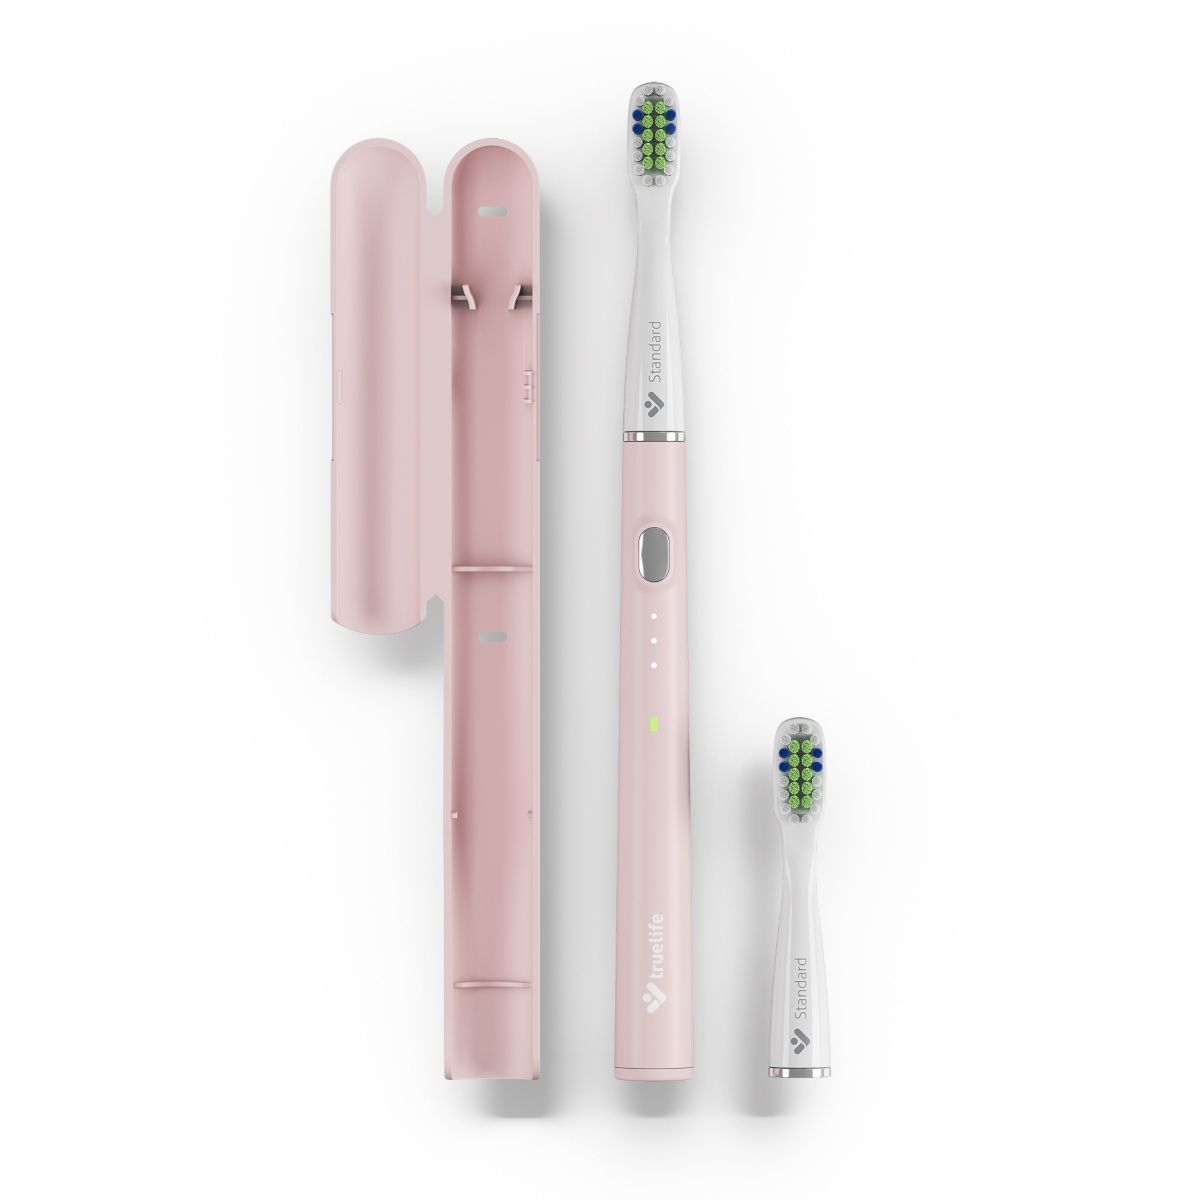 TrueLife SonicBrush Slim20 Pink – Quality affordable care at your fingertips